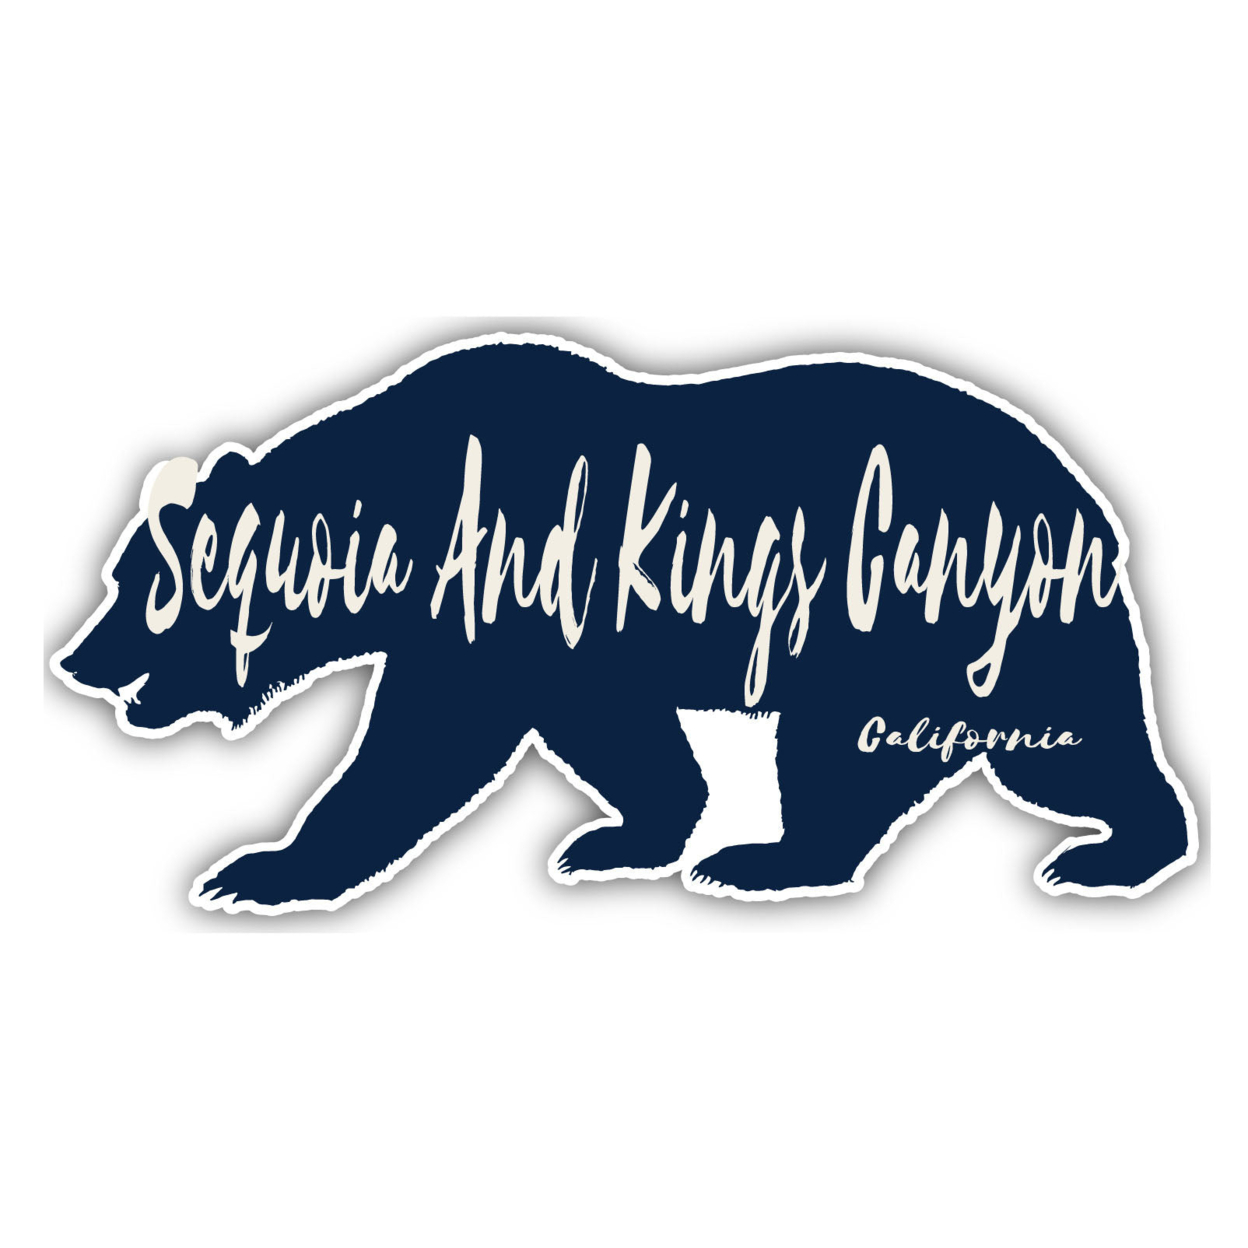 Sequoia And Kings Canyon California Souvenir Decorative Stickers (Choose Theme And Size) - Single Unit, 4-Inch, Bear